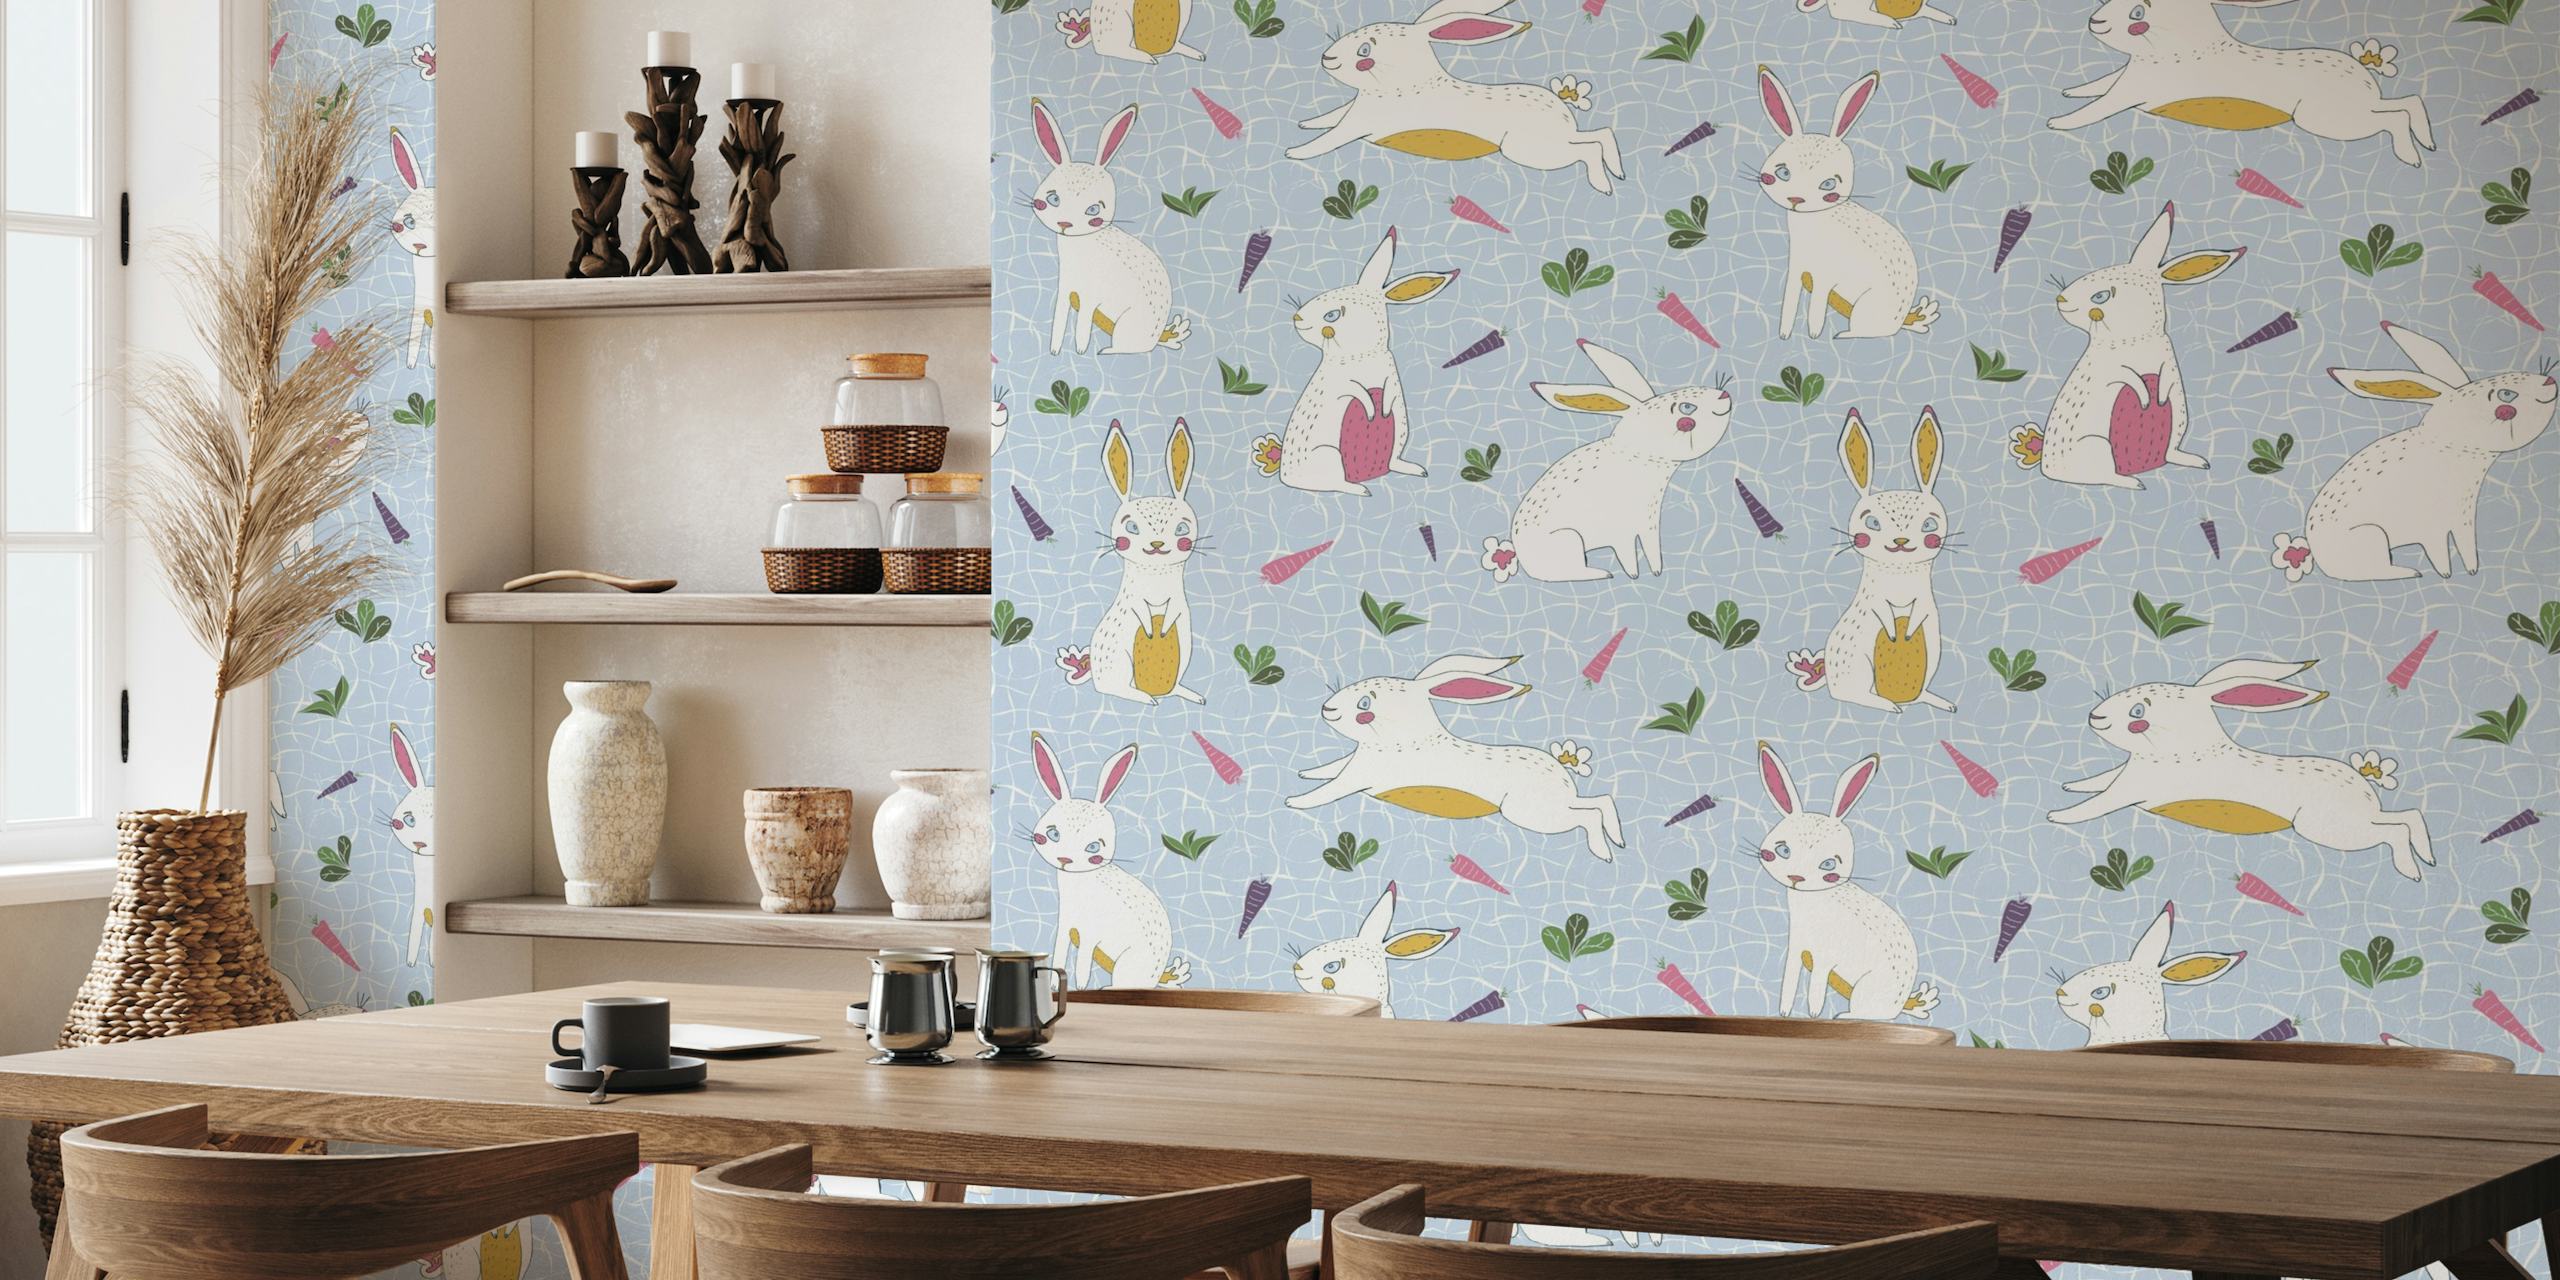 Happy bunnies playing and eating in nature papel de parede